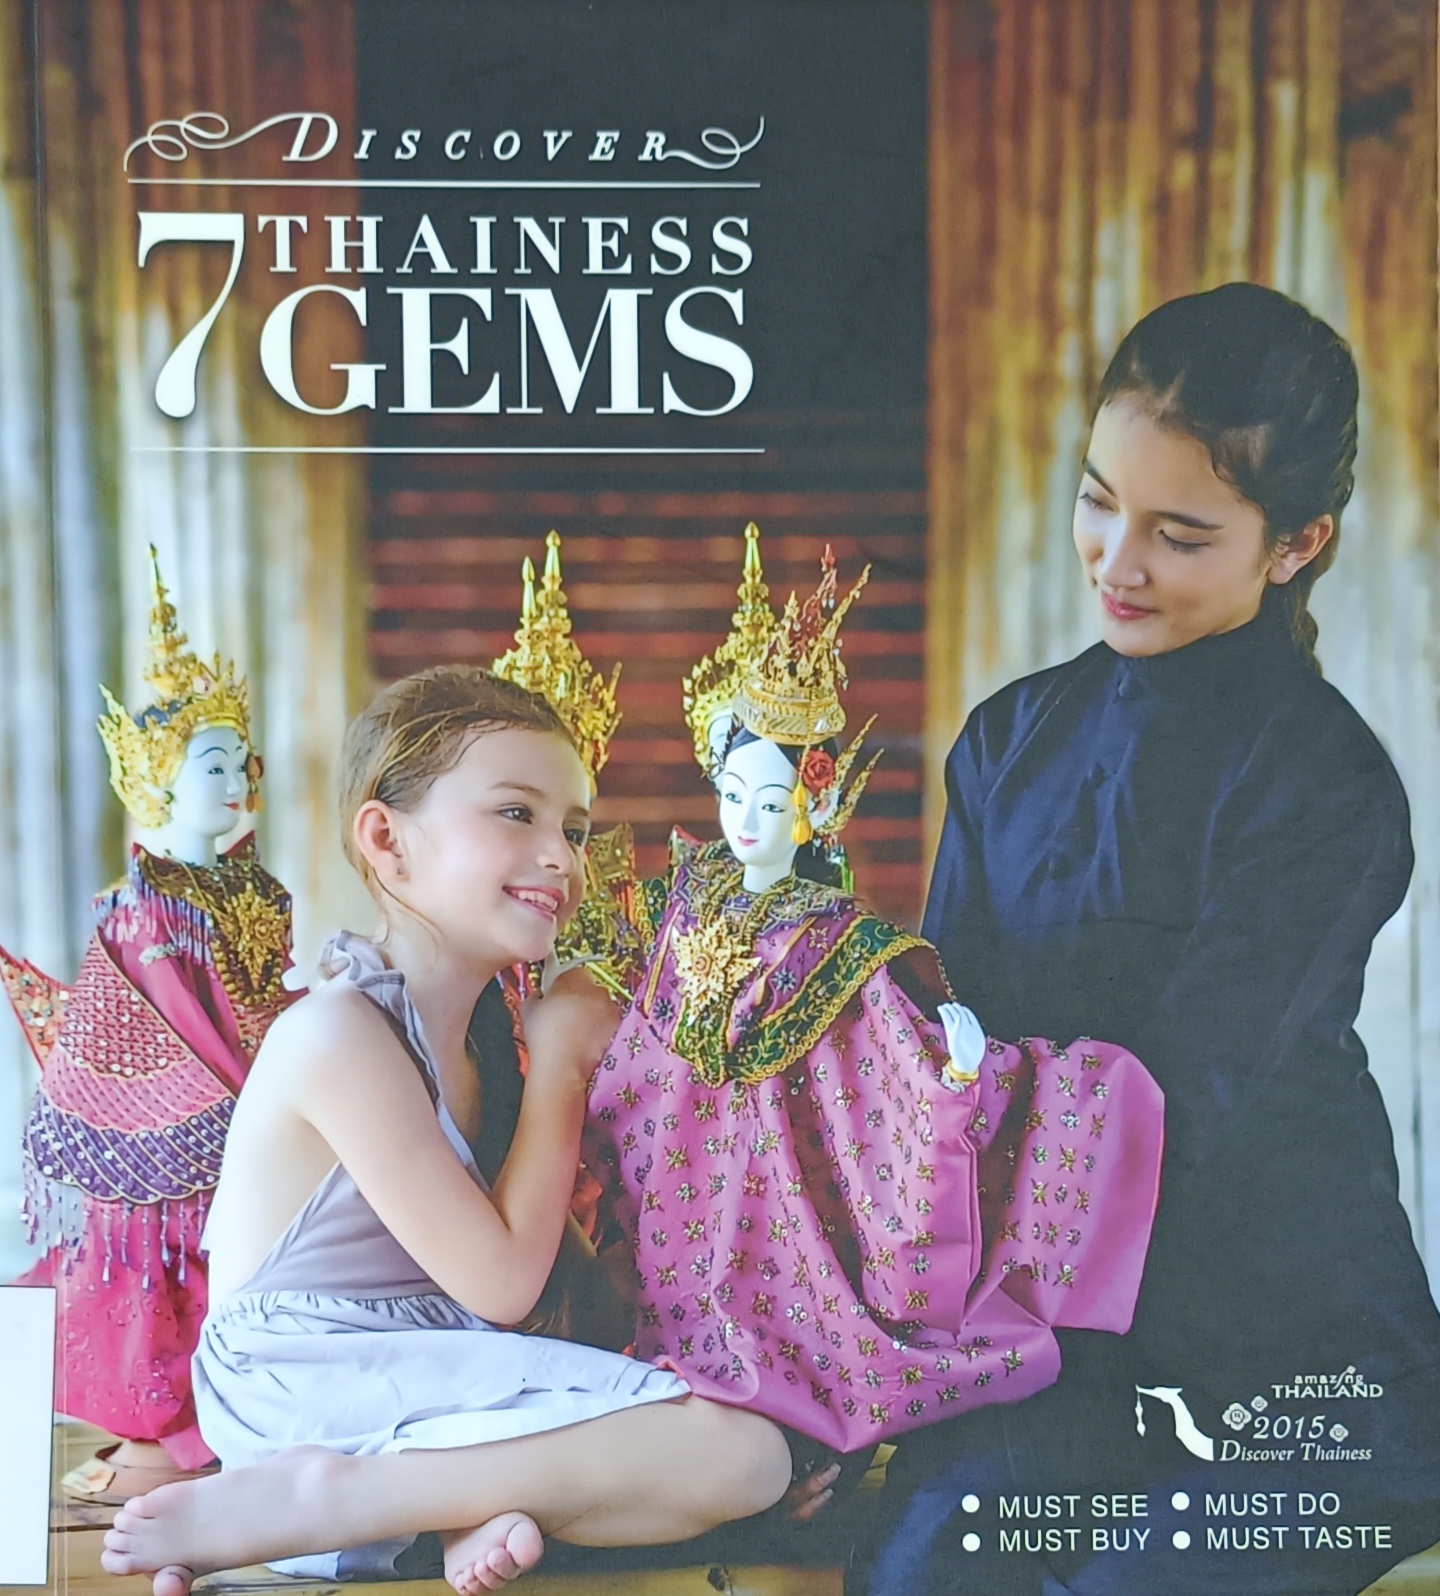 Cover image for Discover 7 thainess gems bibliographic